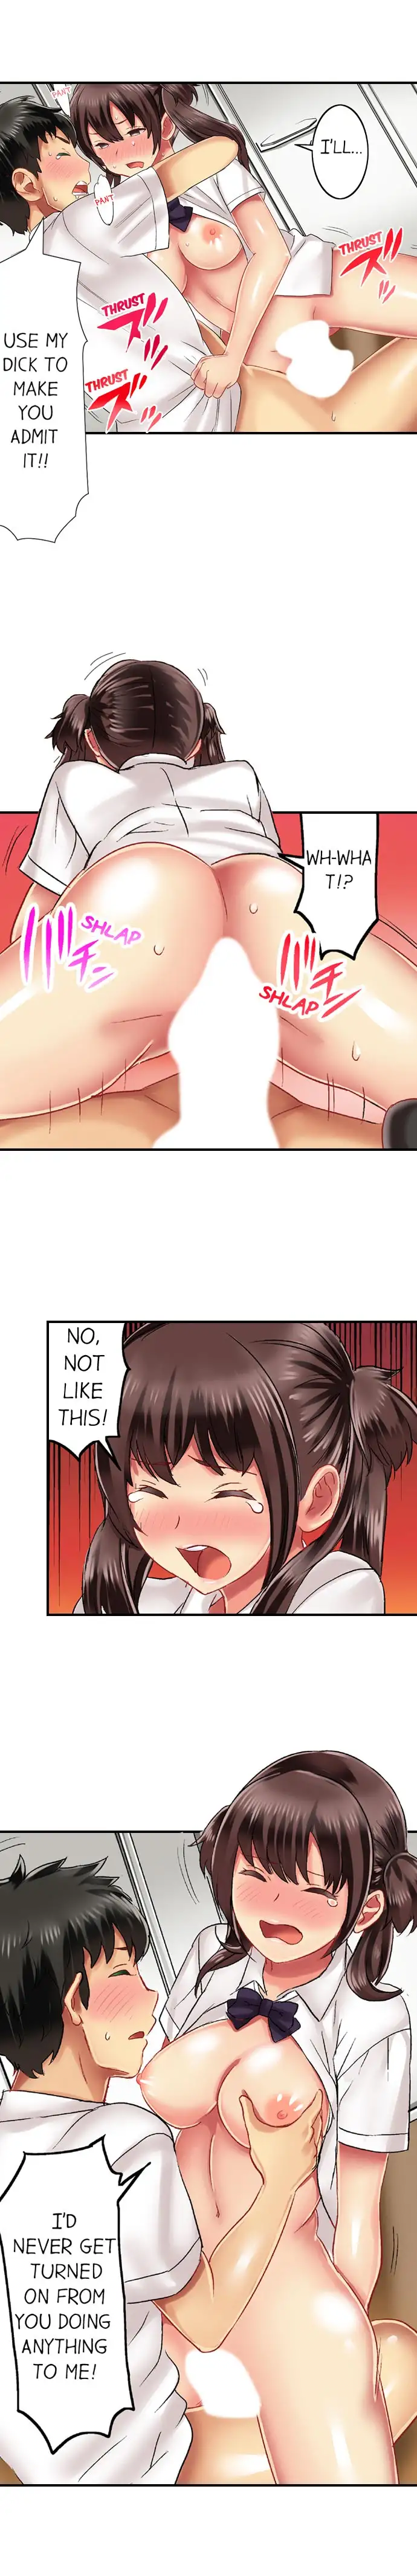 Seeing Her Panties Lets Me Stick In - Chapter 18 Page 4